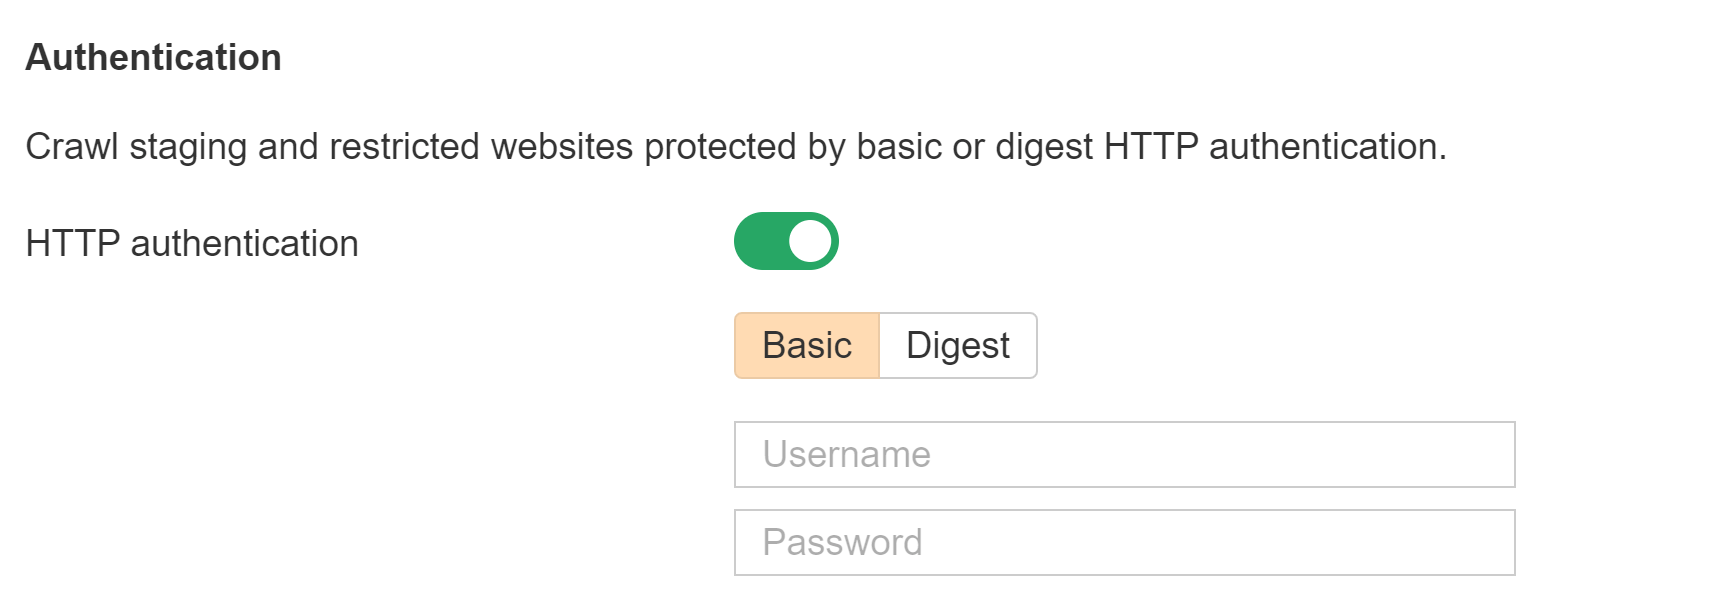 Crawl staging or dev sites with HTTP authentication